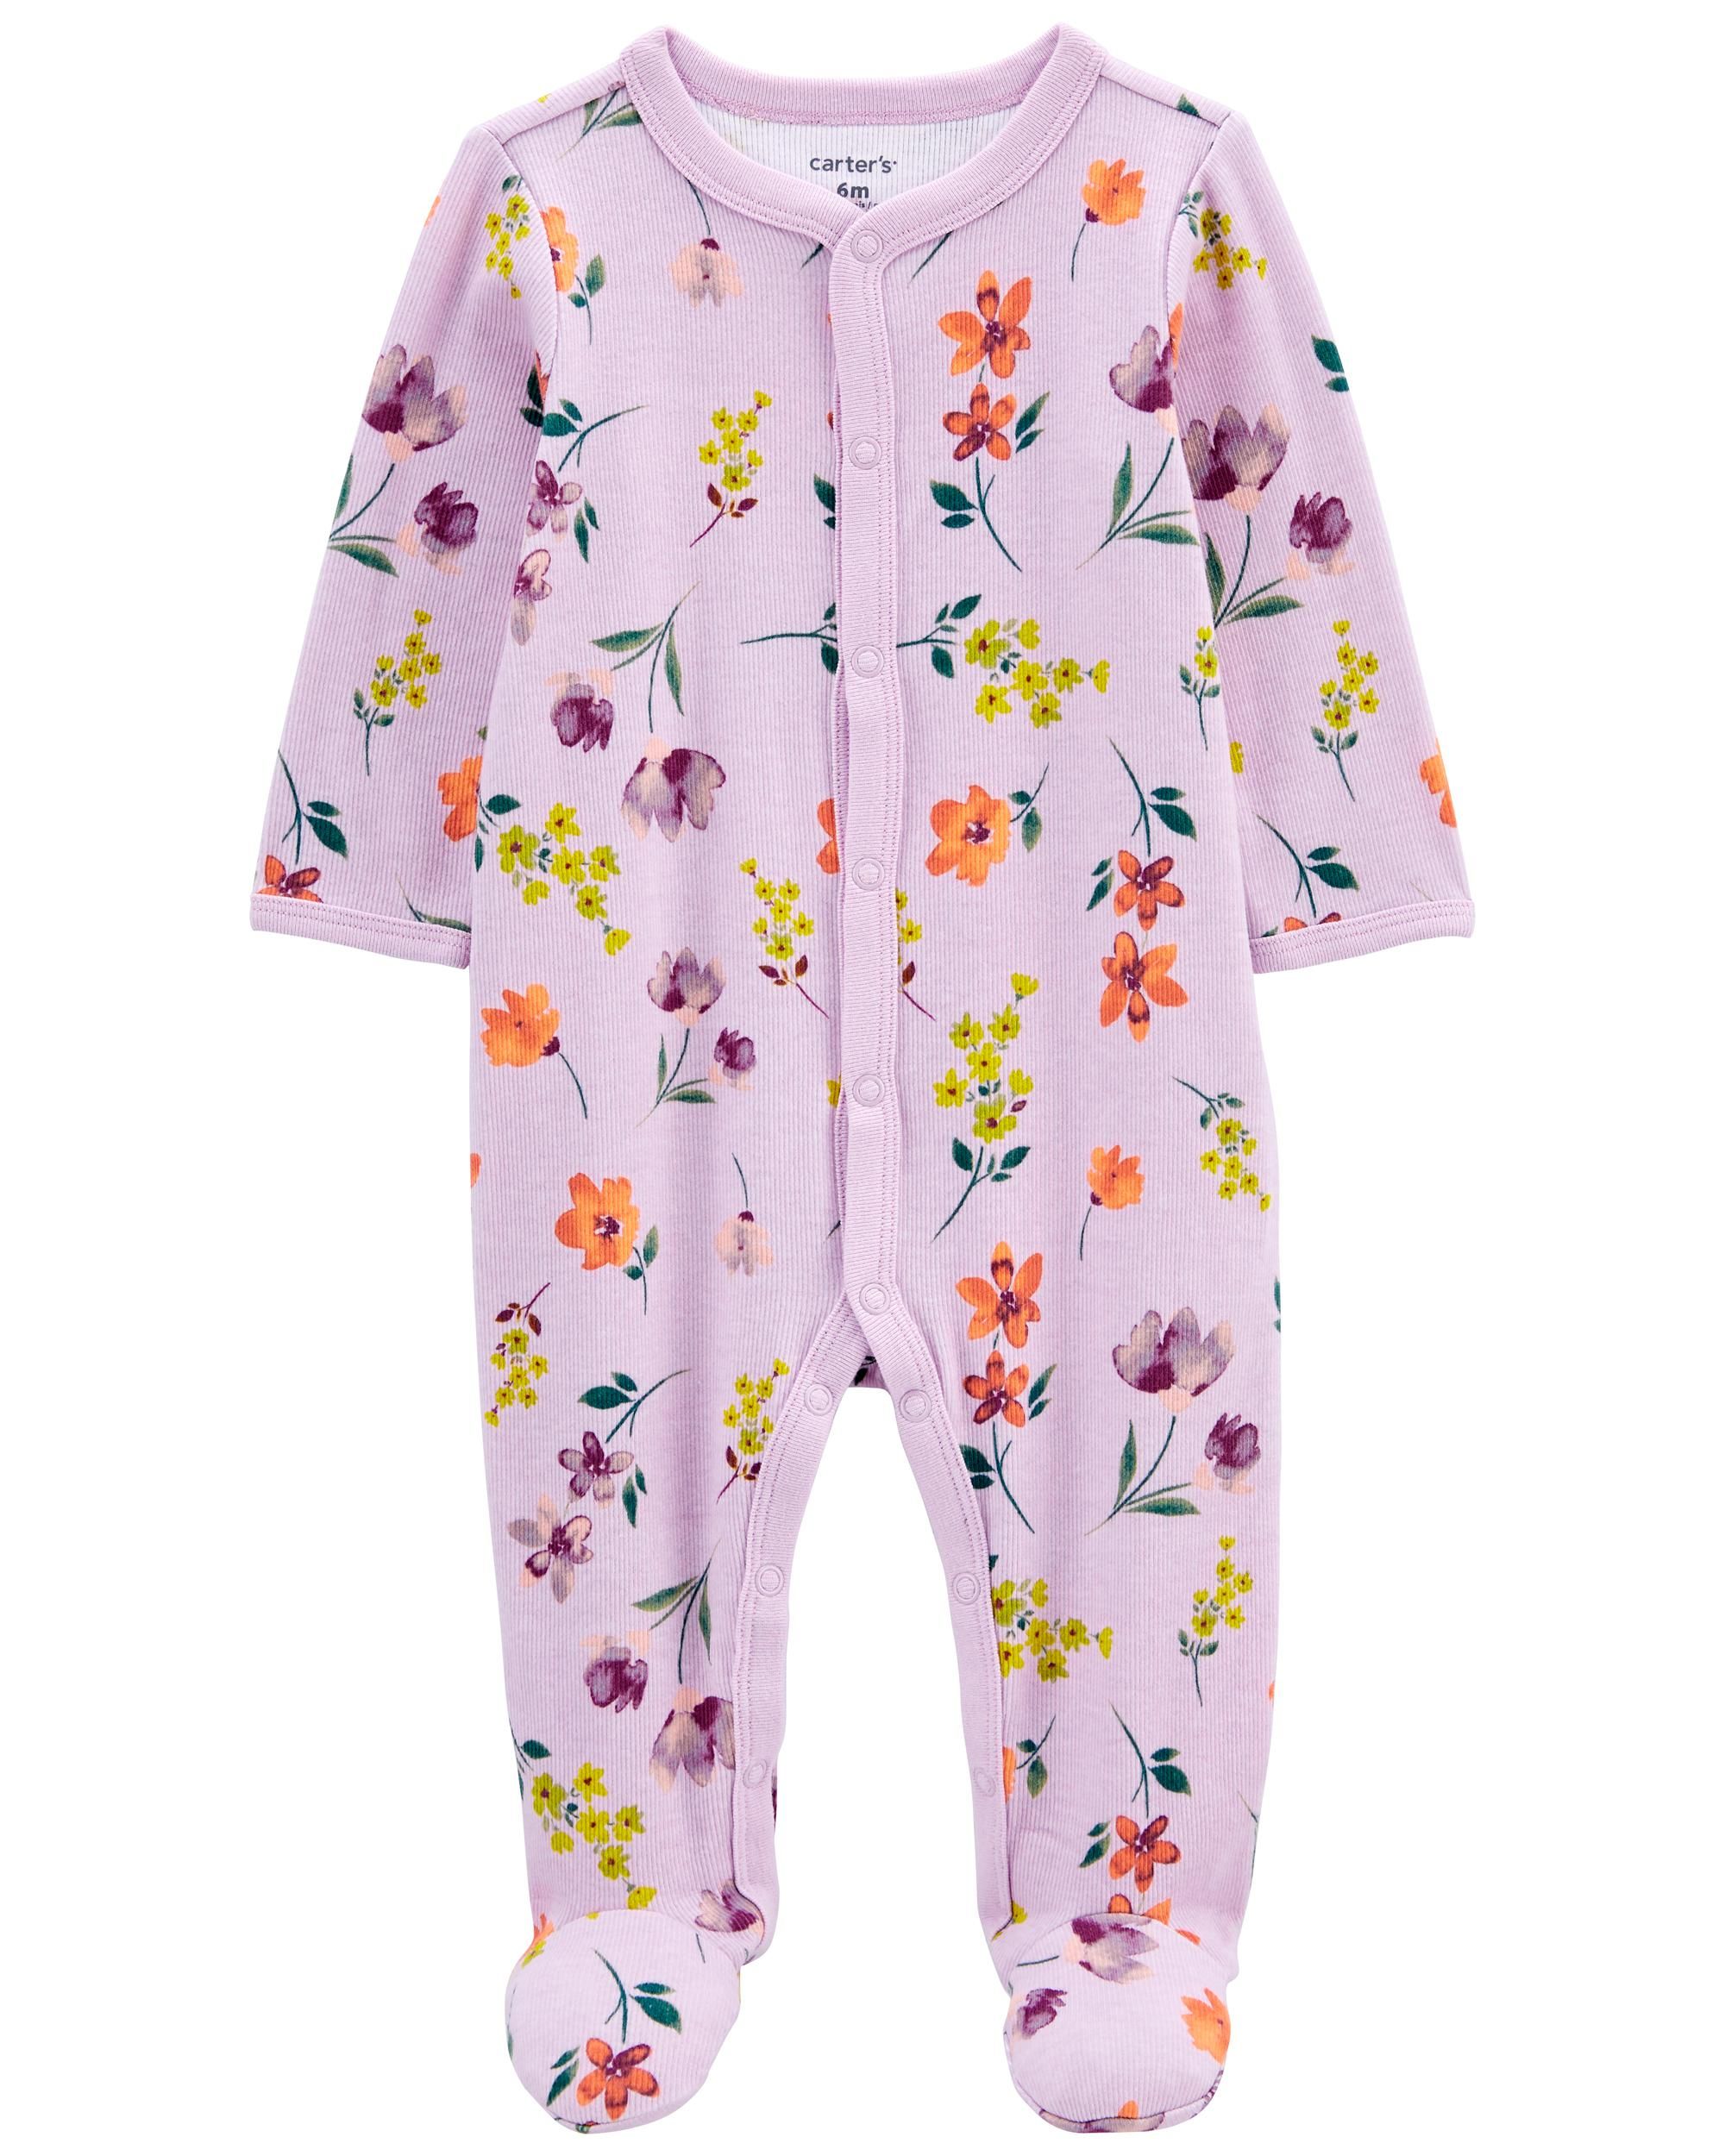 Baby Floral Snap-Up Footie Sleep & Play | Carter's